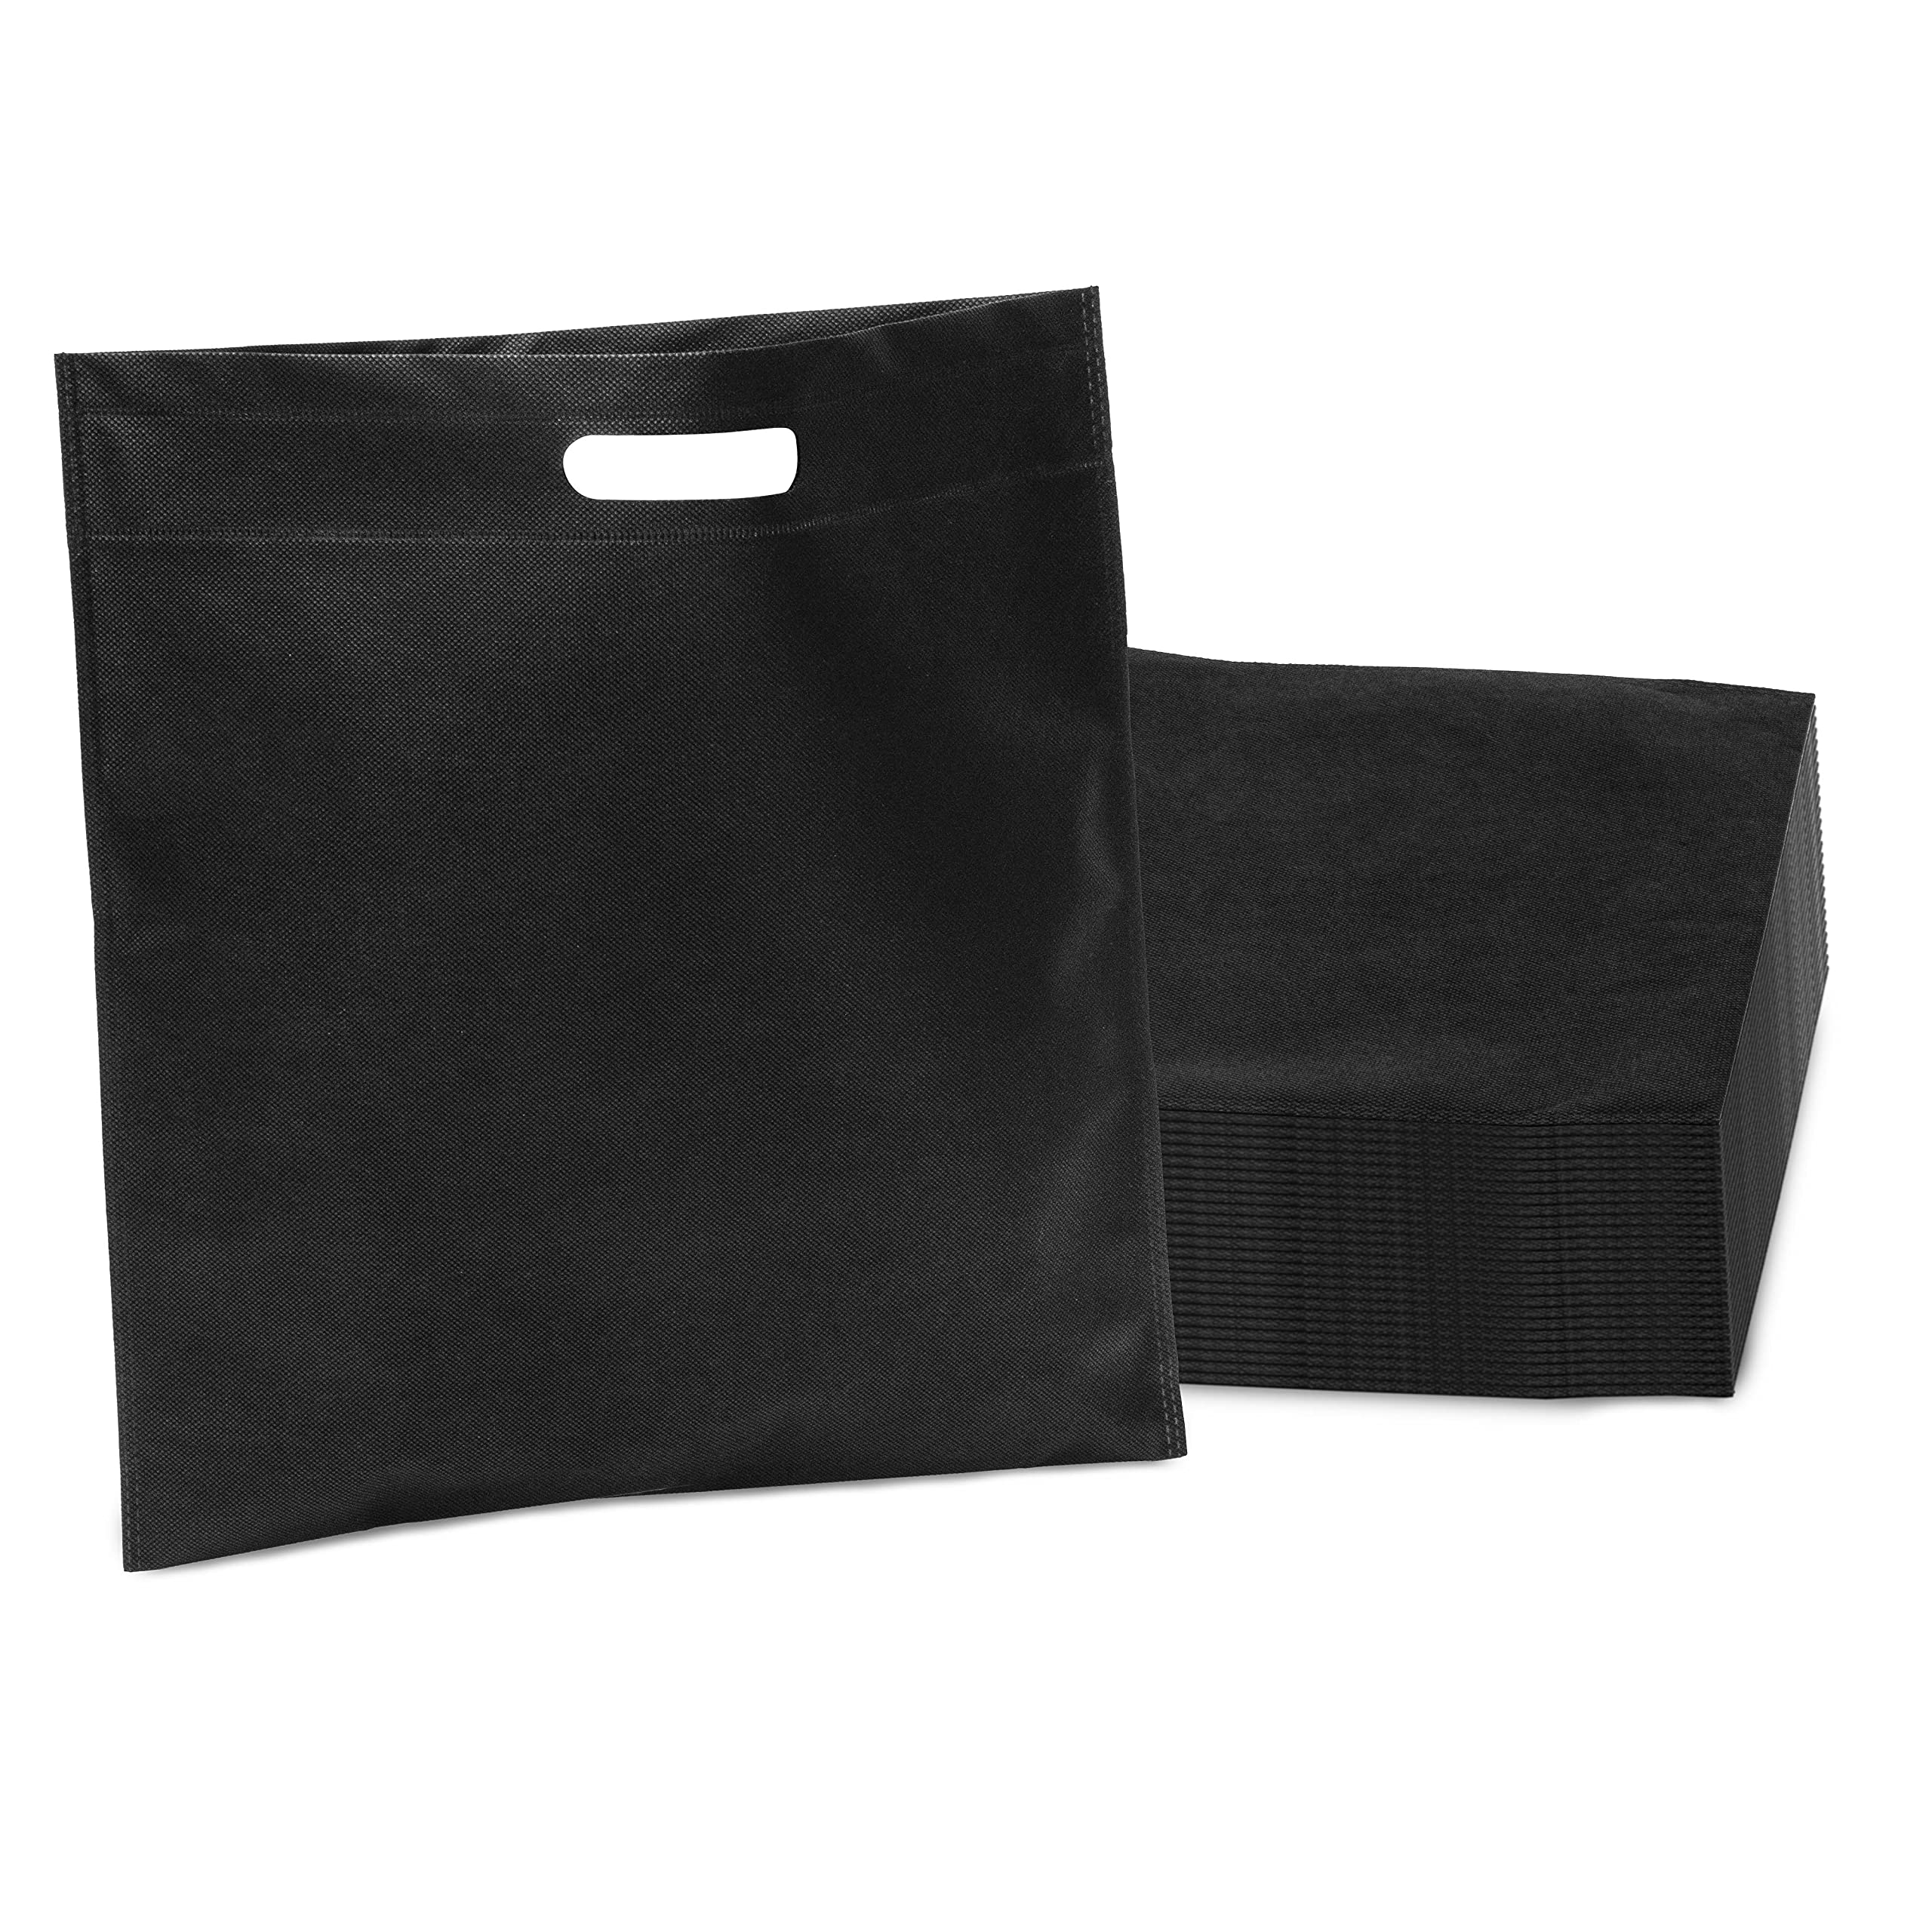 Prime Line Packaging 15x16 Shopping & Merchandise Bags  - Very Good